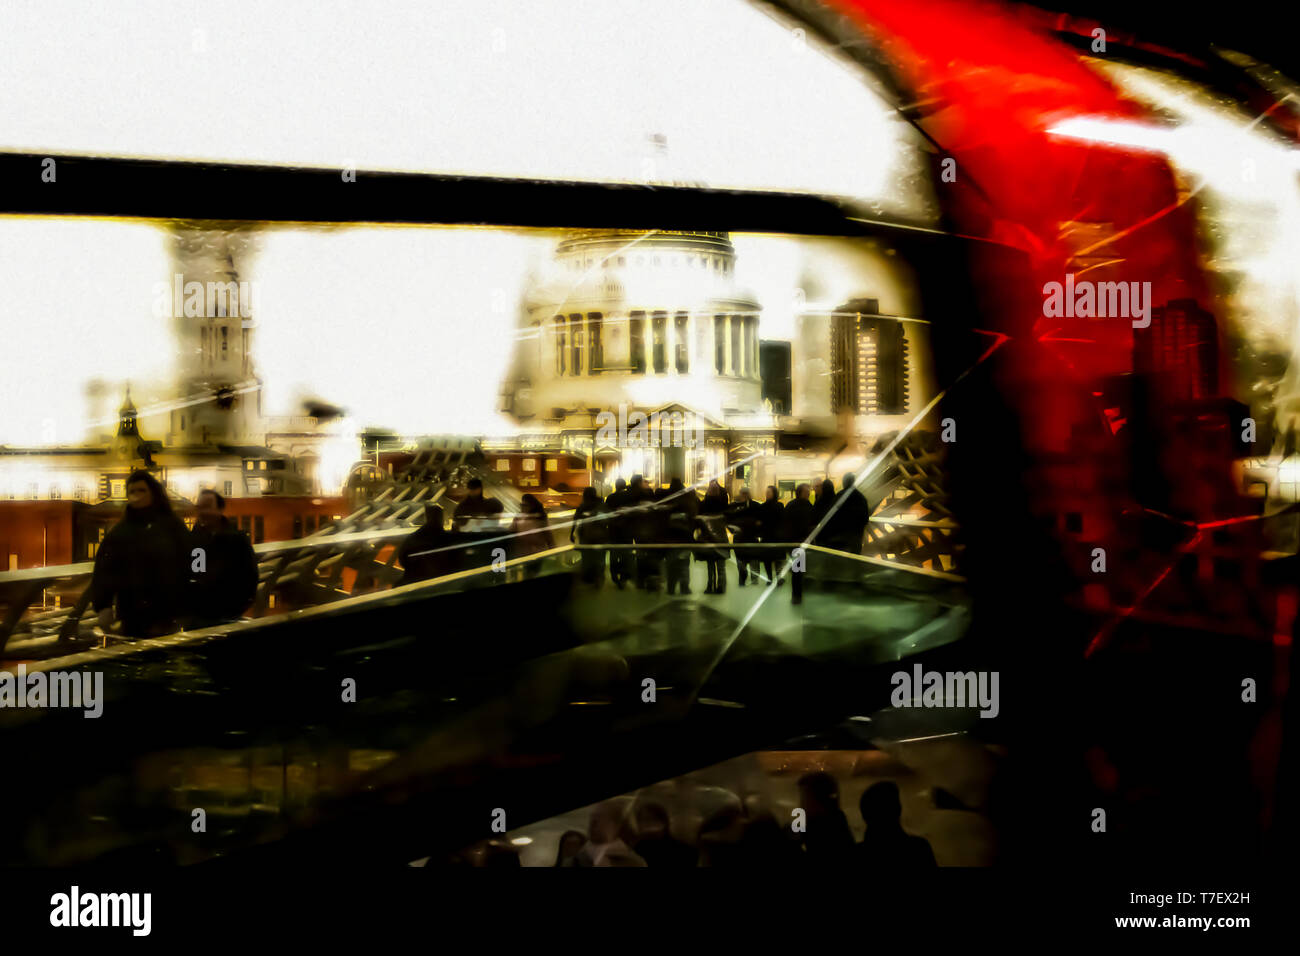 Montage of London looking through a window of a underground tube train with people walking across the millennium bridge towards St. Paul's Cathedral Stock Photo